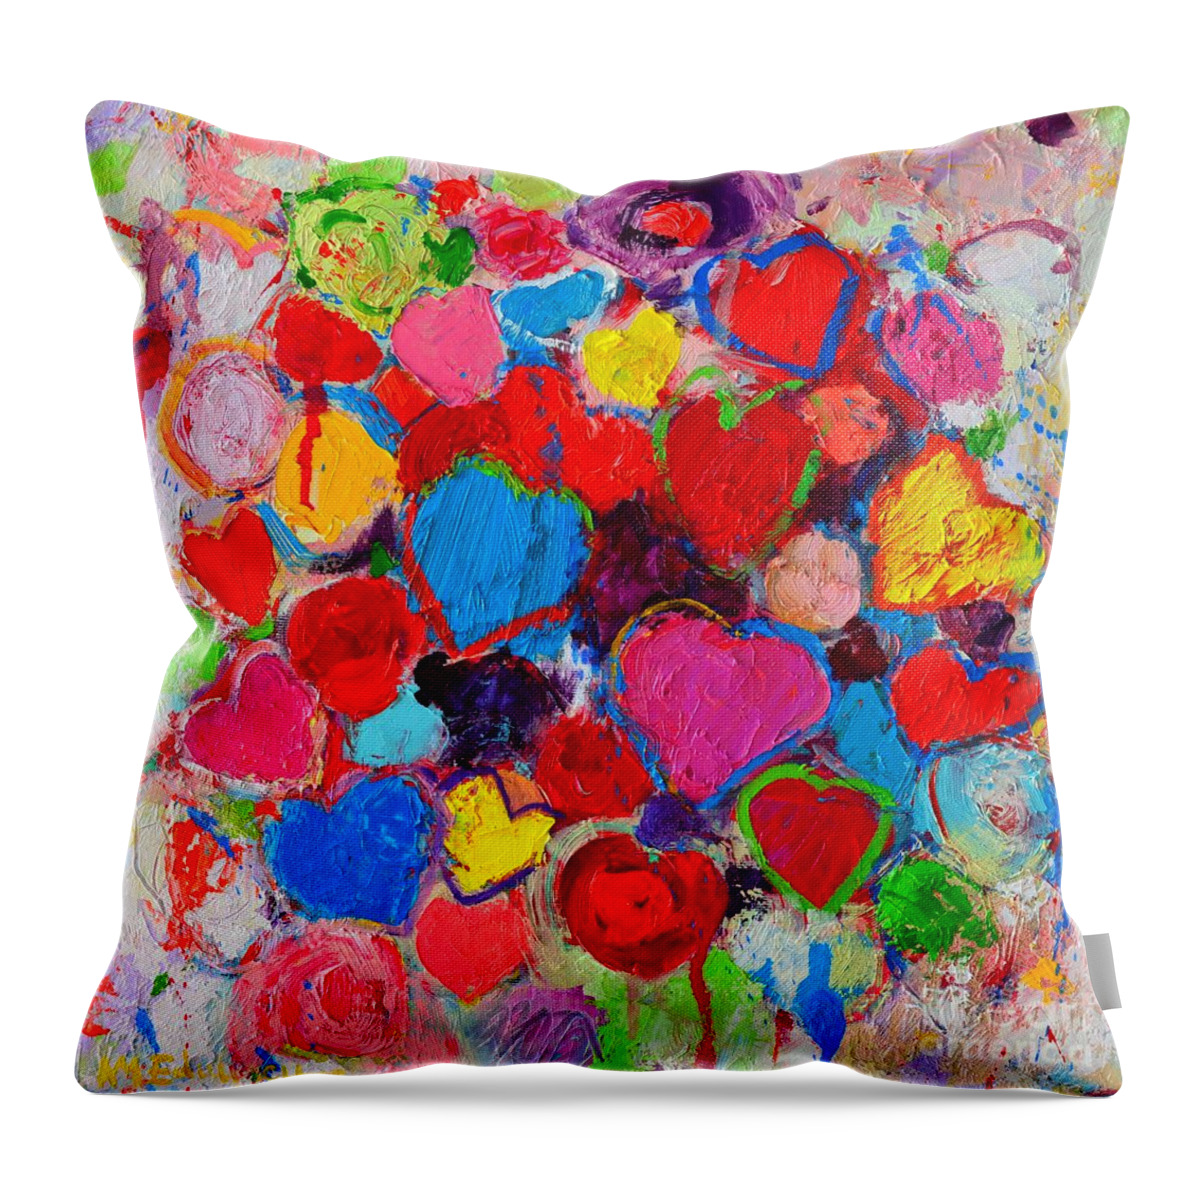 Hearts Throw Pillow featuring the painting Abstract Love Bouquet Of Colorful Hearts And Flowers by Ana Maria Edulescu